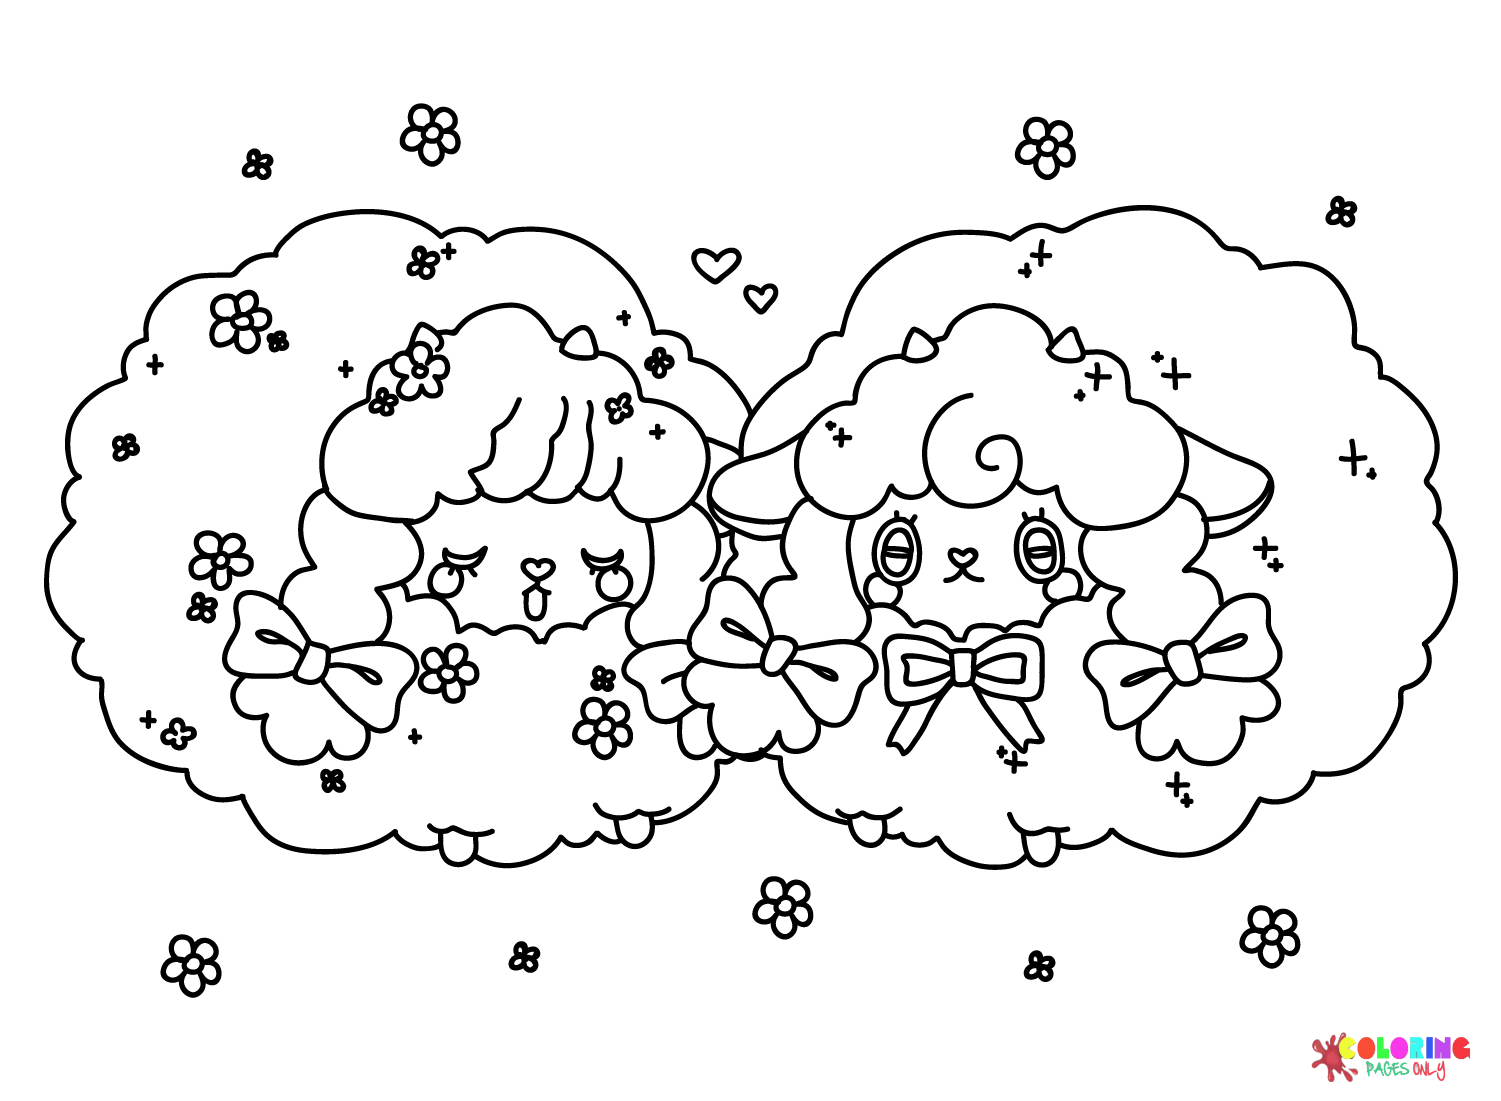 Wooloo Lovely from Wooloo